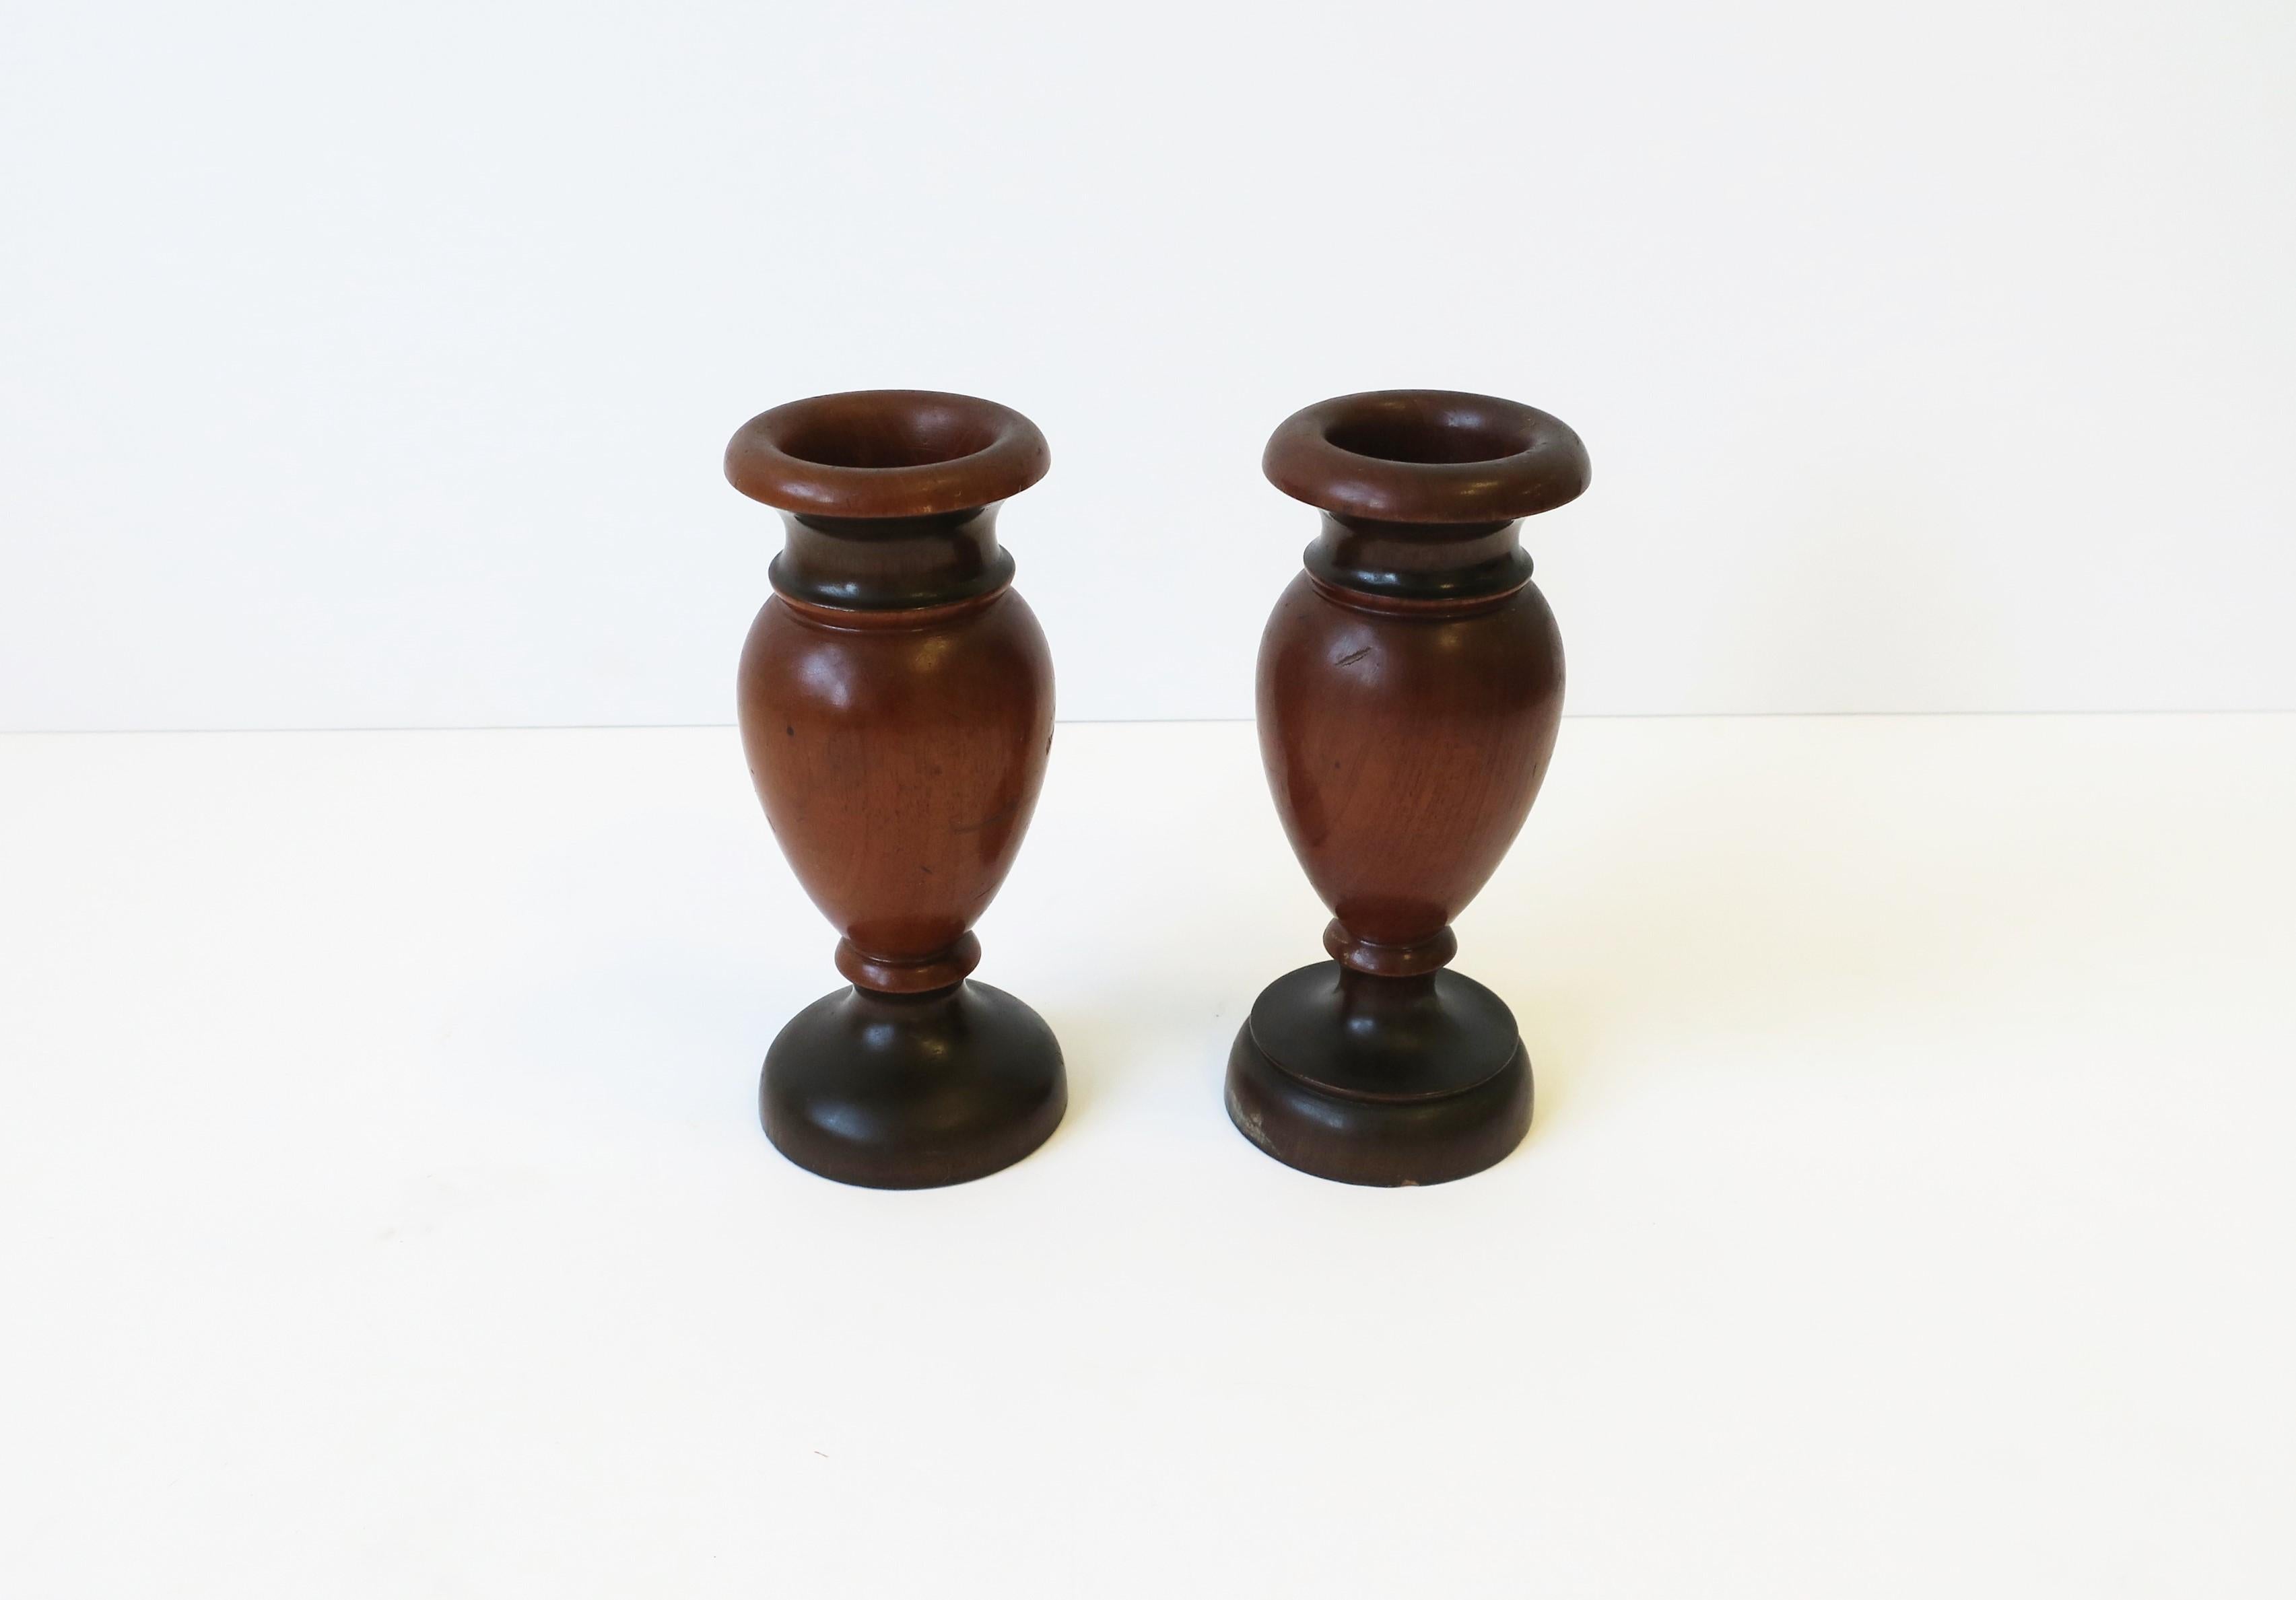 English Turned Walnut Urn Wood Spill Vases, Pair, circa 19th Century For Sale 4